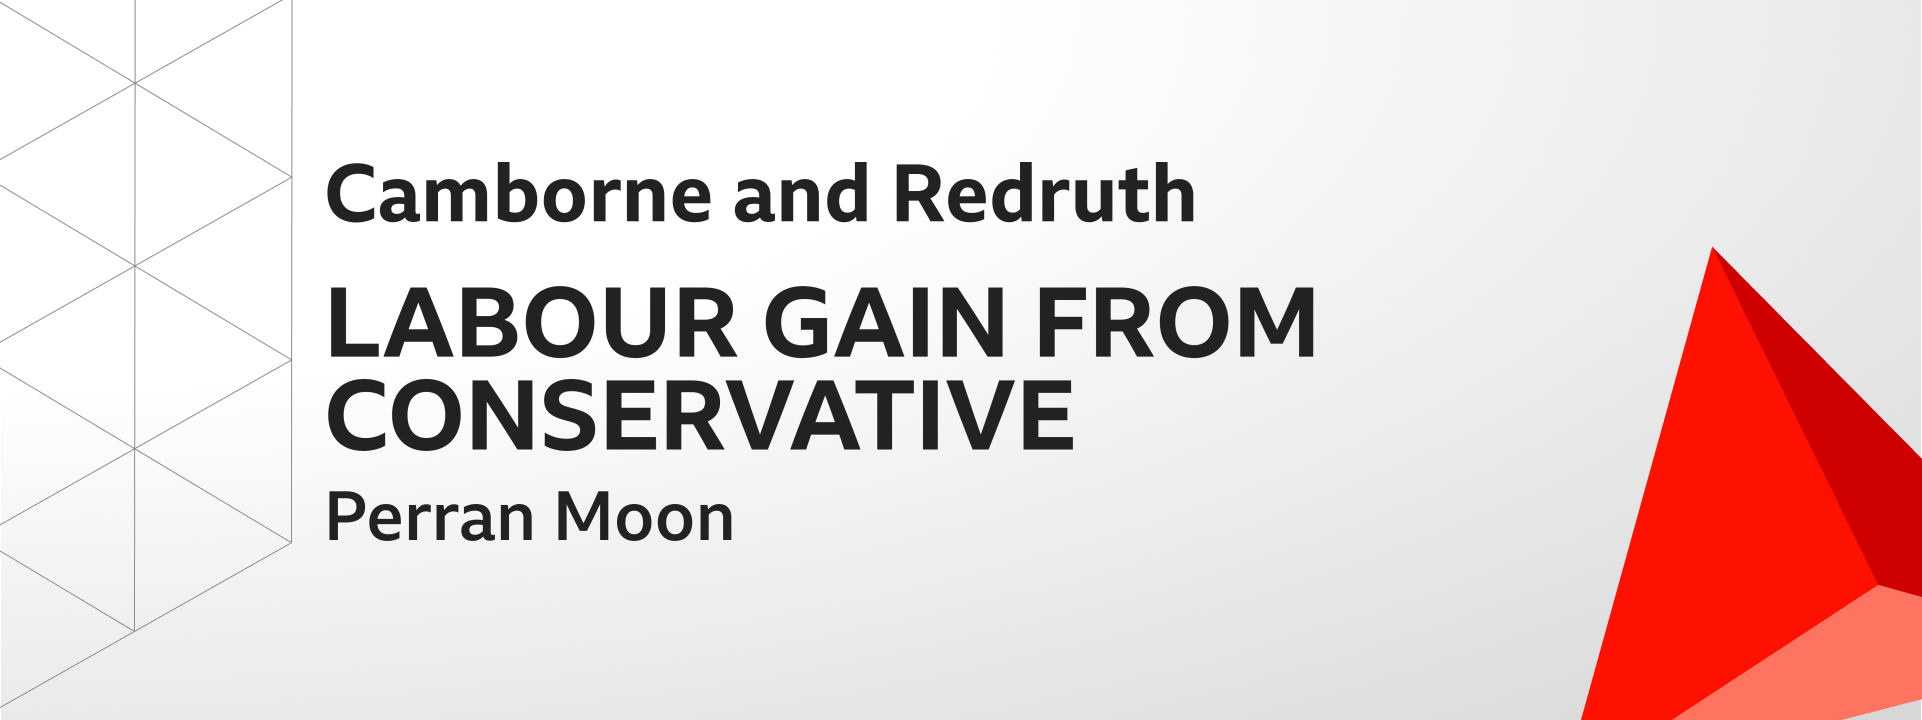 Graphic showing Labour gains Camborne and Redruth from the Conservatives. The winning candidate was Perran Moon.